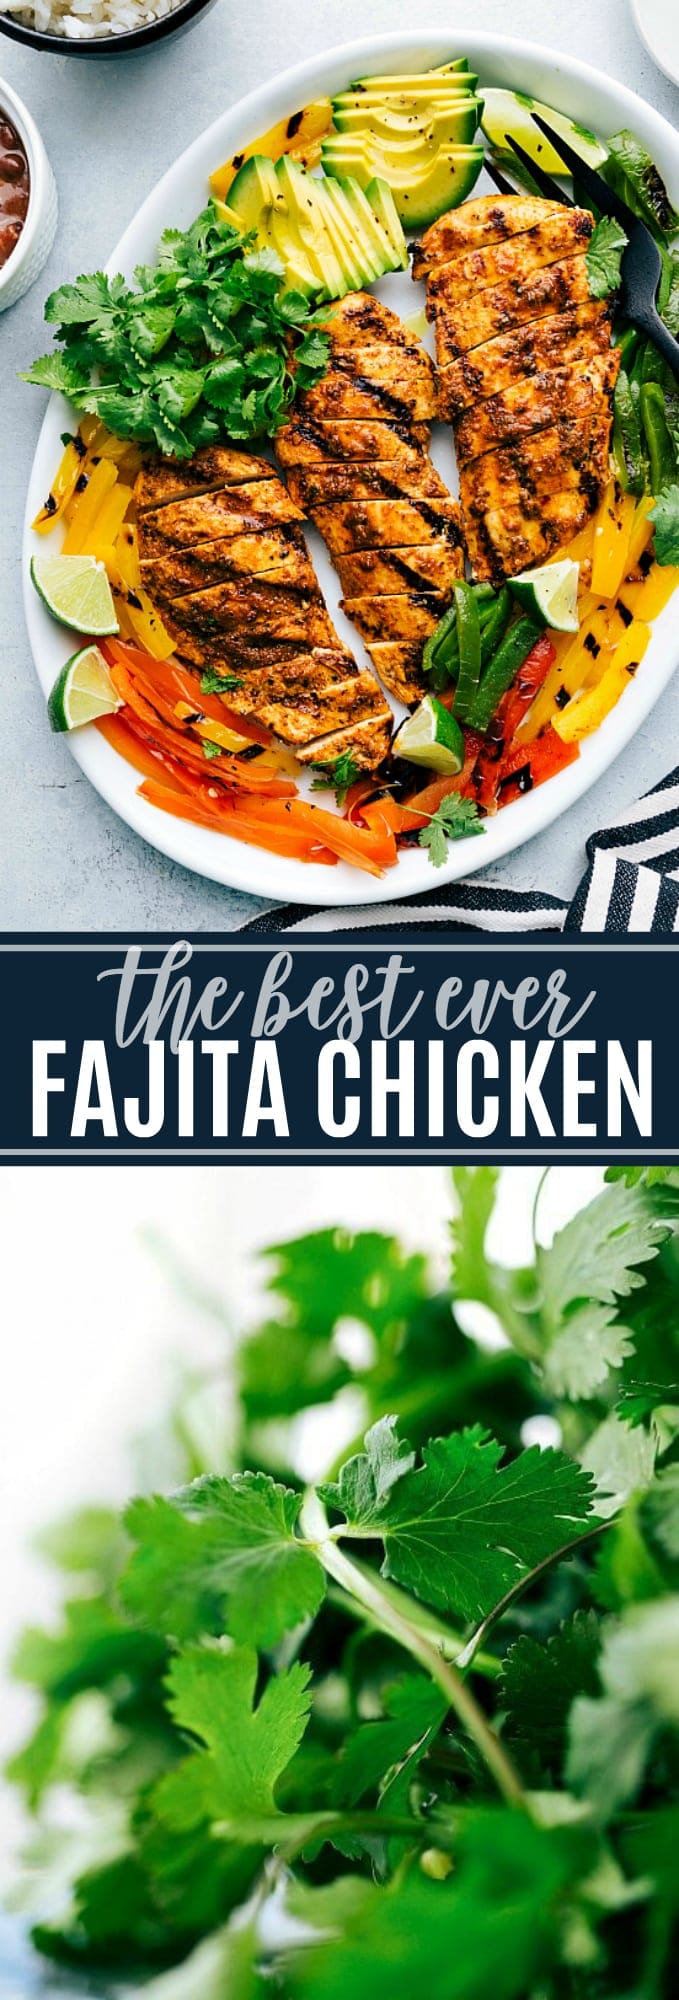 The ultimate BEST EVER Chicken Fajita Bowls! Delicious and so simple to make! via chelseasmessyapron.com via chelseasmessyapron.com